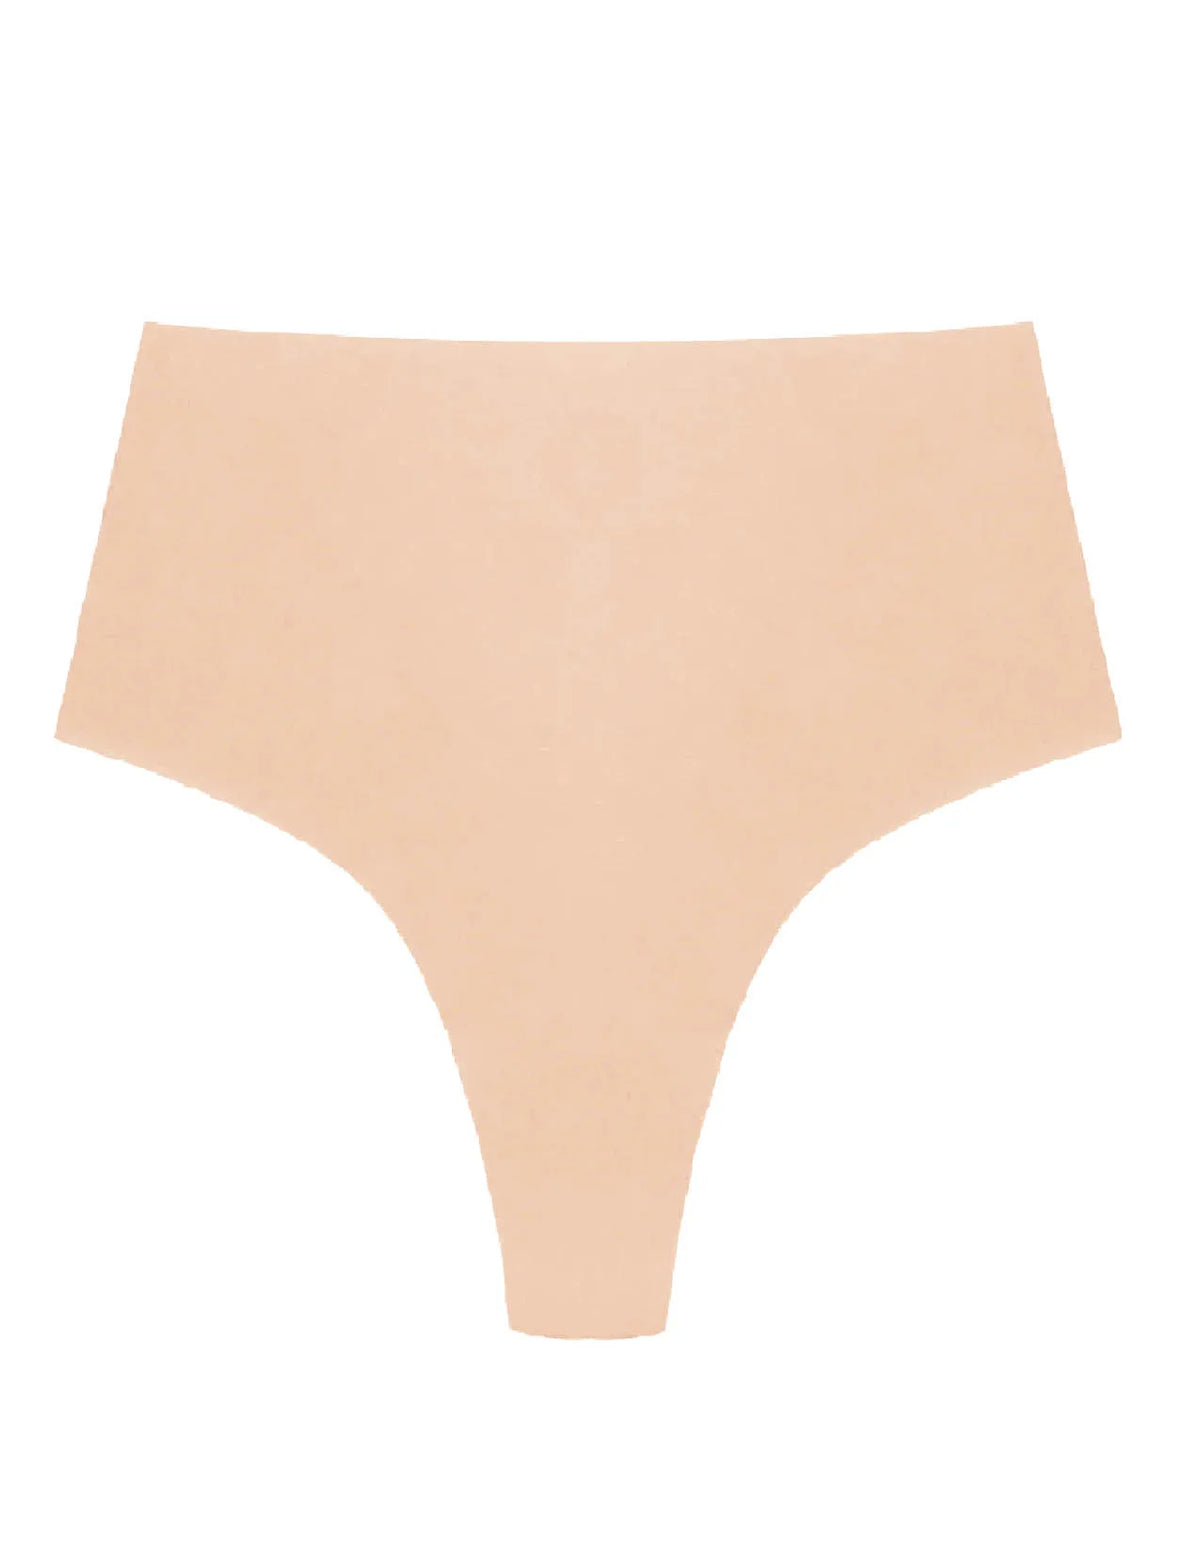 Seamless, Organic, Cotton High-Rise Thong at Belle Lacet Lingerie